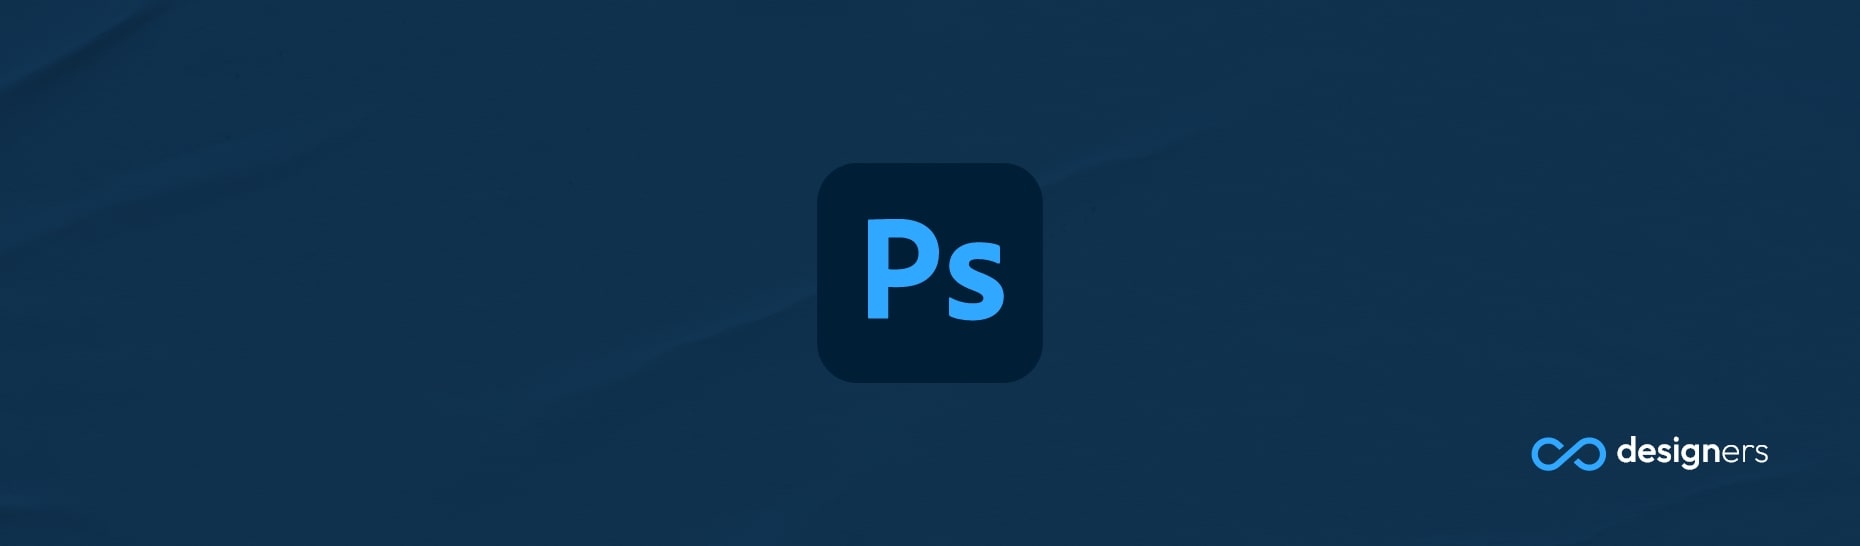 How Do I Save a .ICO File in Photoshop?